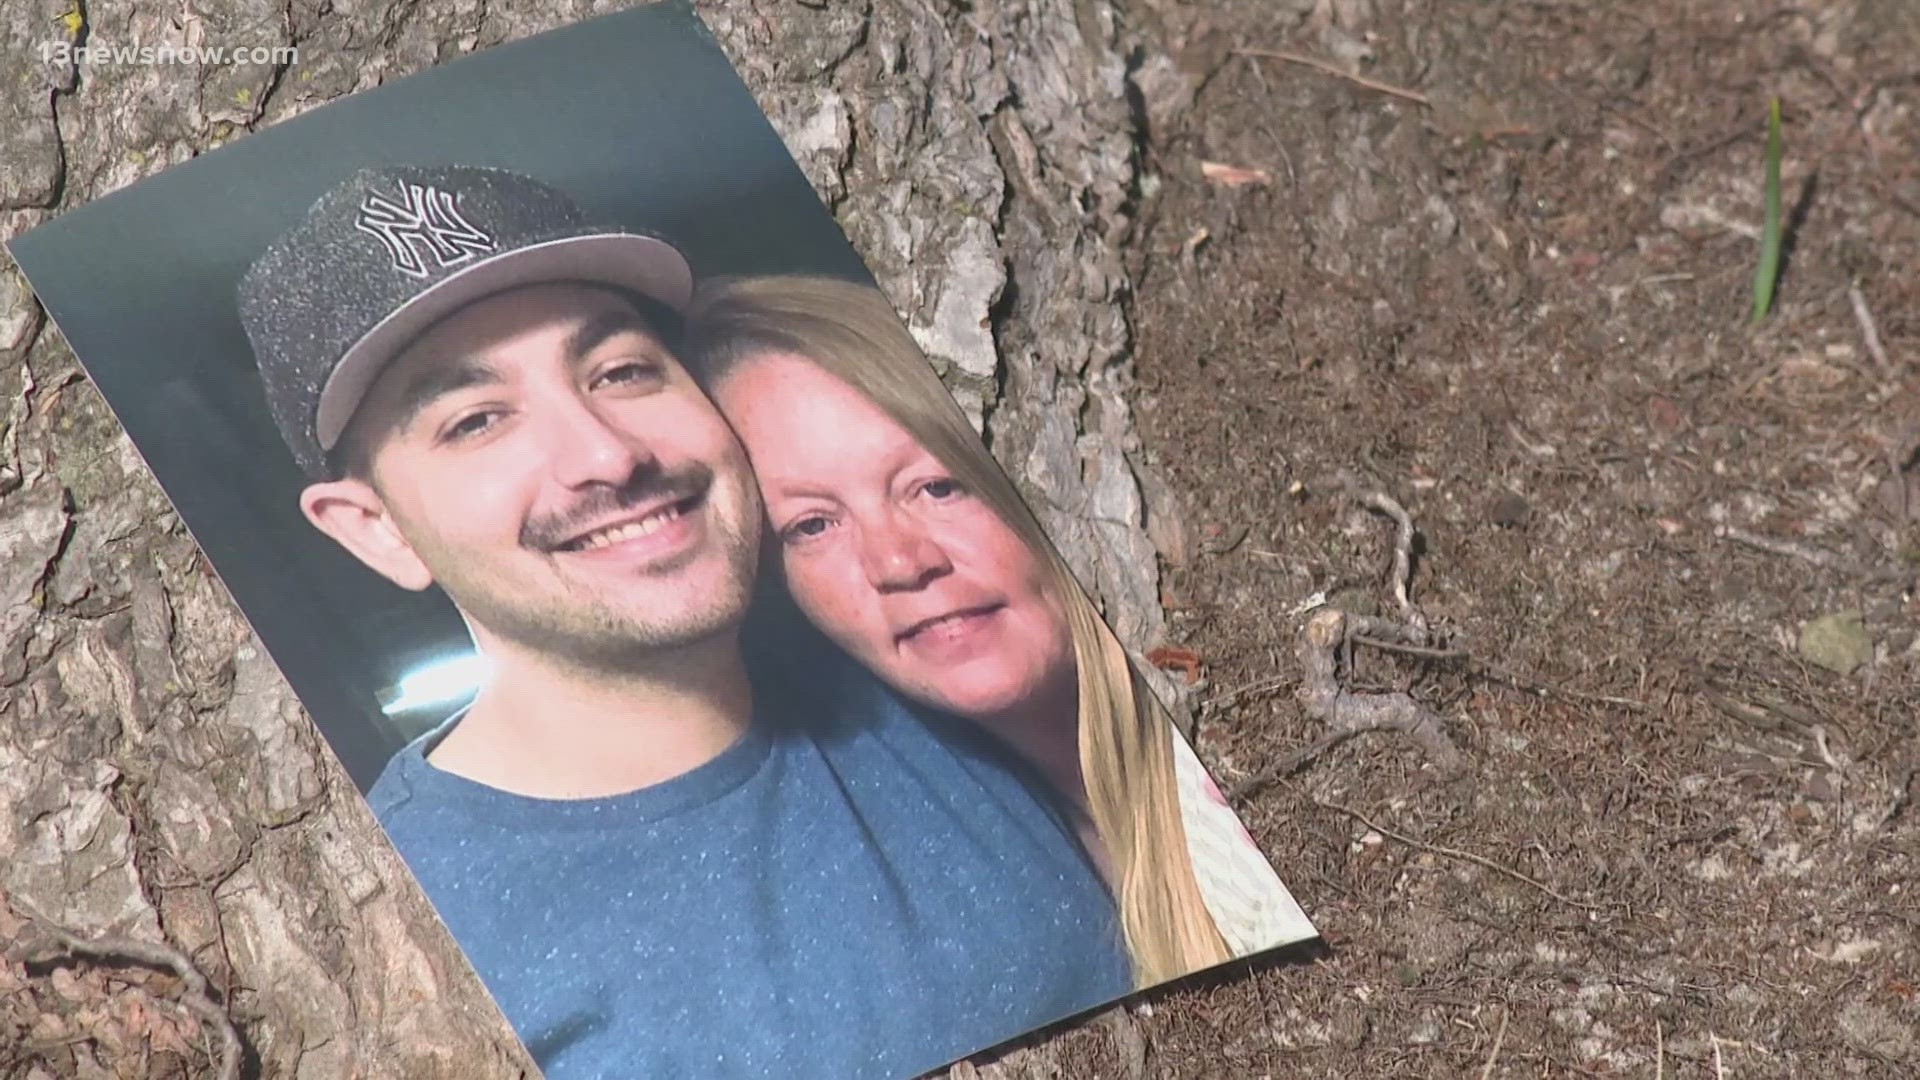 The mother of the missing man says he often walked to the city park or the vape shop, but he would always return a couple of hours later.